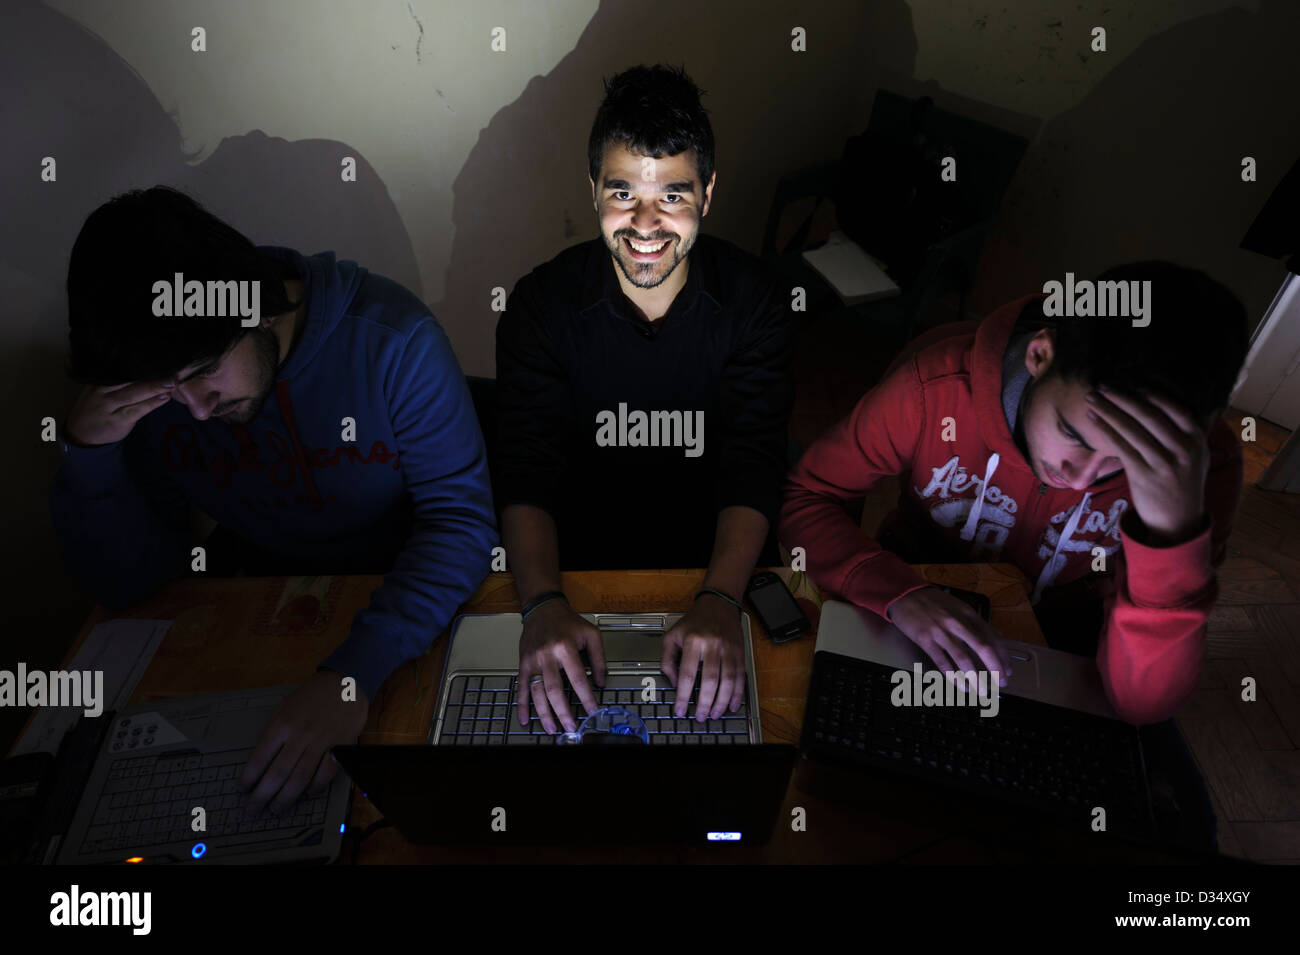 Three young men using laptop computers Stock Photo